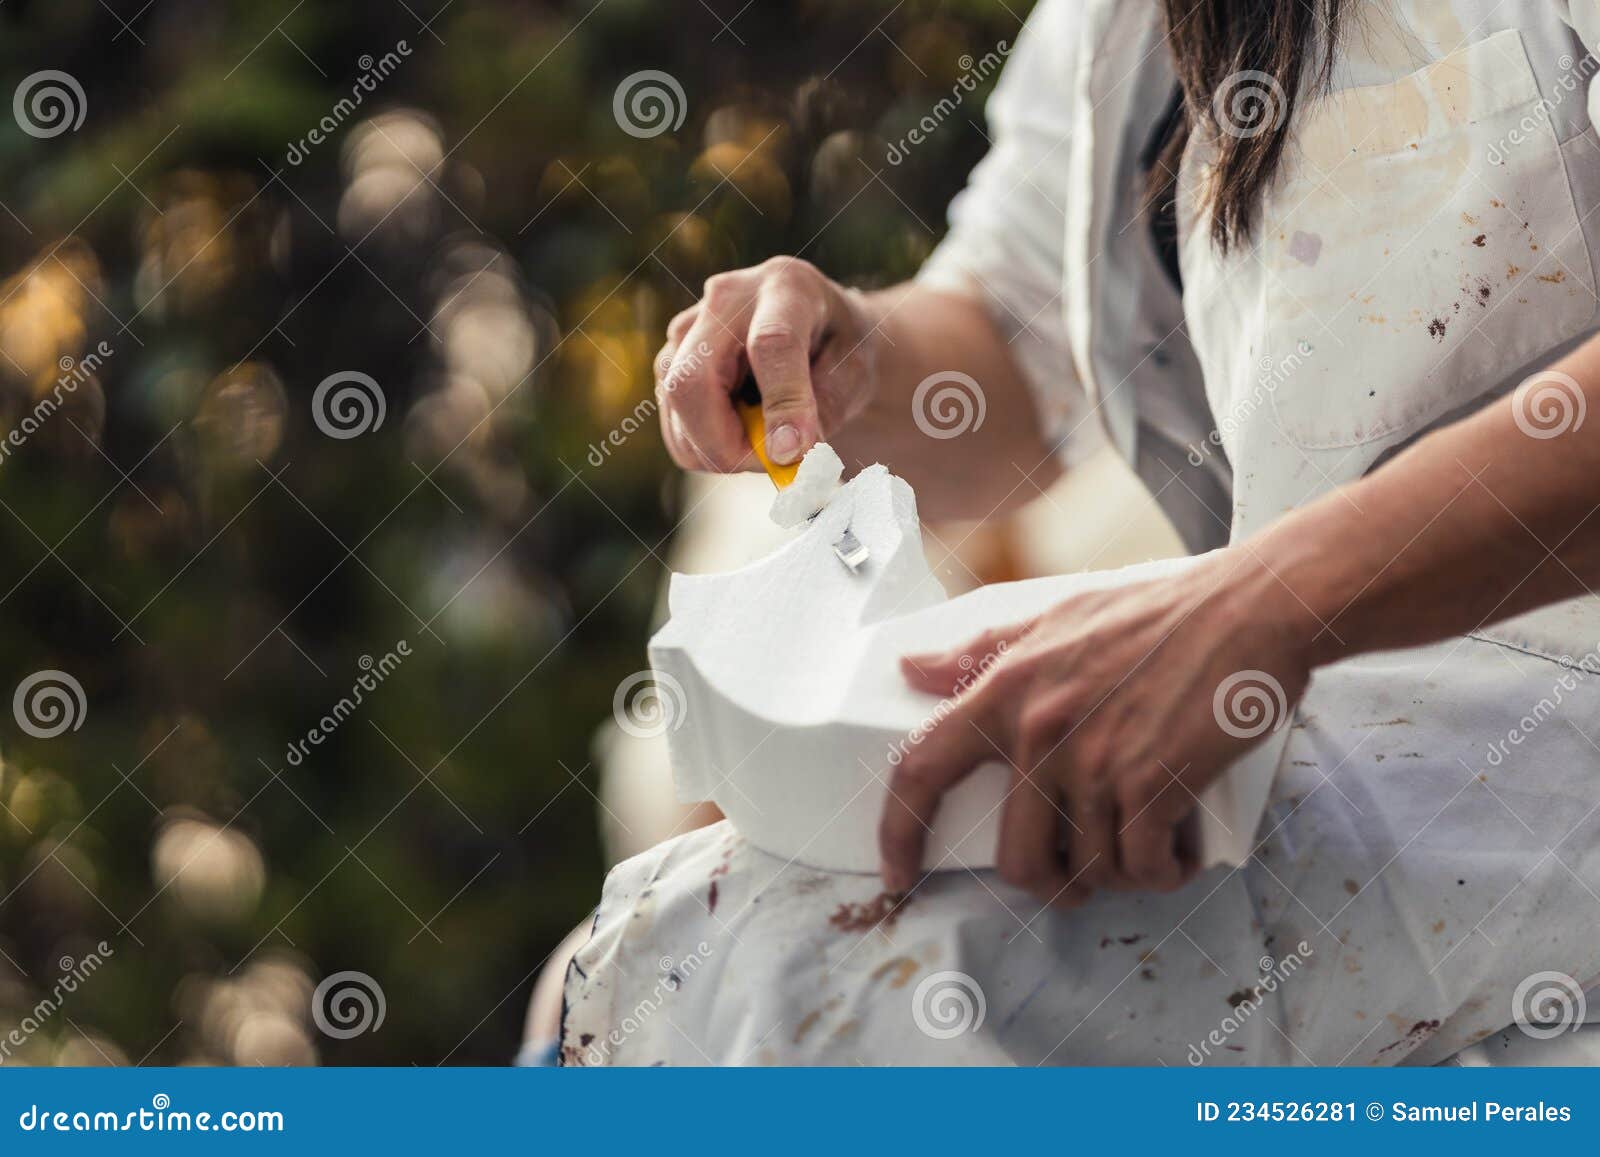 woman cutting part of the surface of a piece of polystyrene outdoors